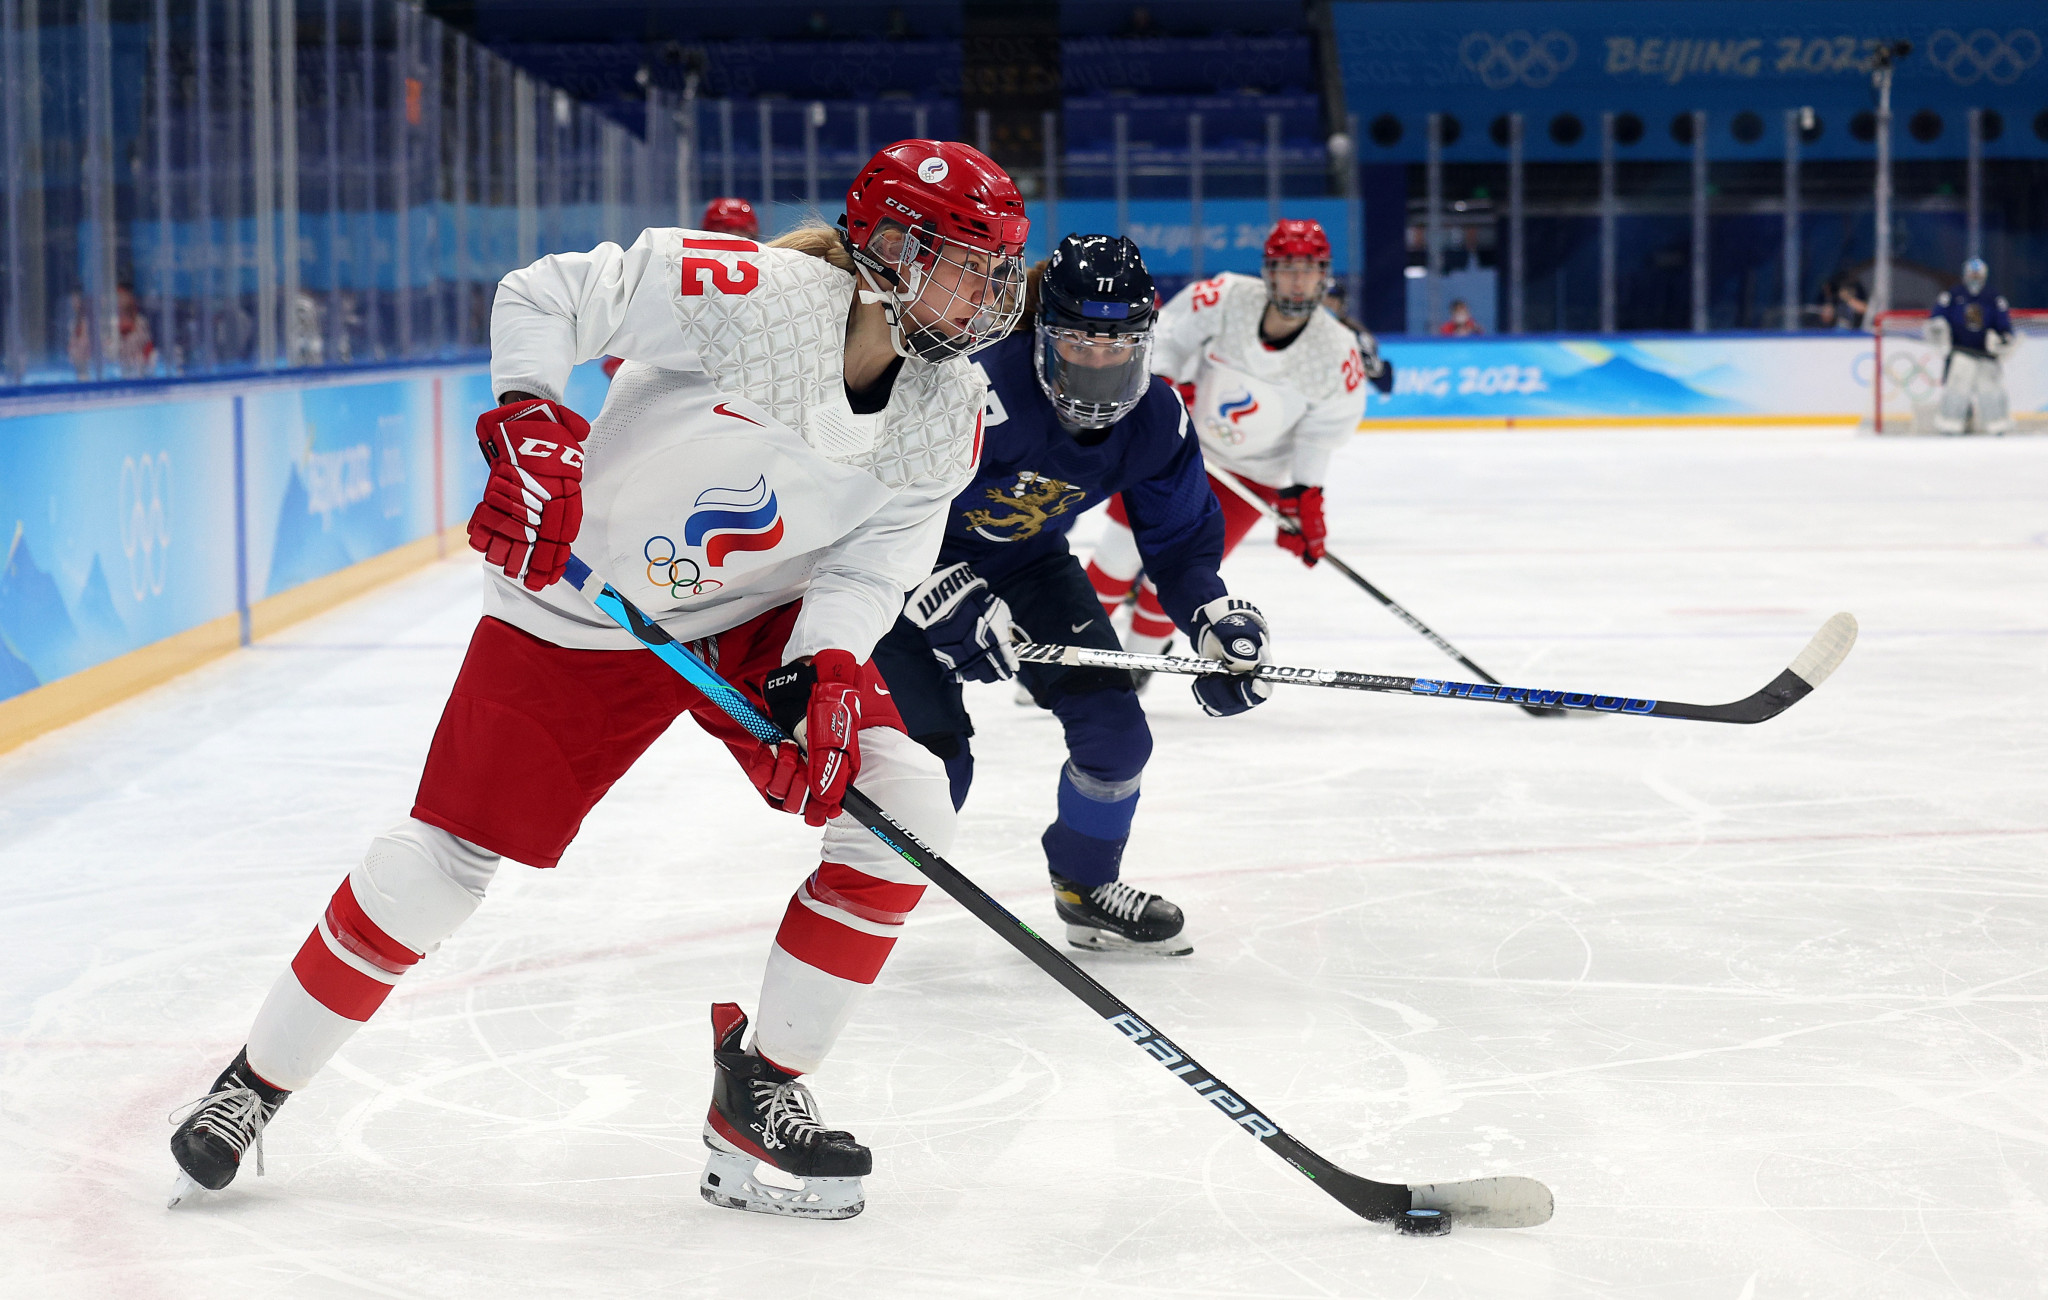 Maria Pechnikova has become the latest ROC ice hockey player to test positive for COVID-19 ©Getty Images